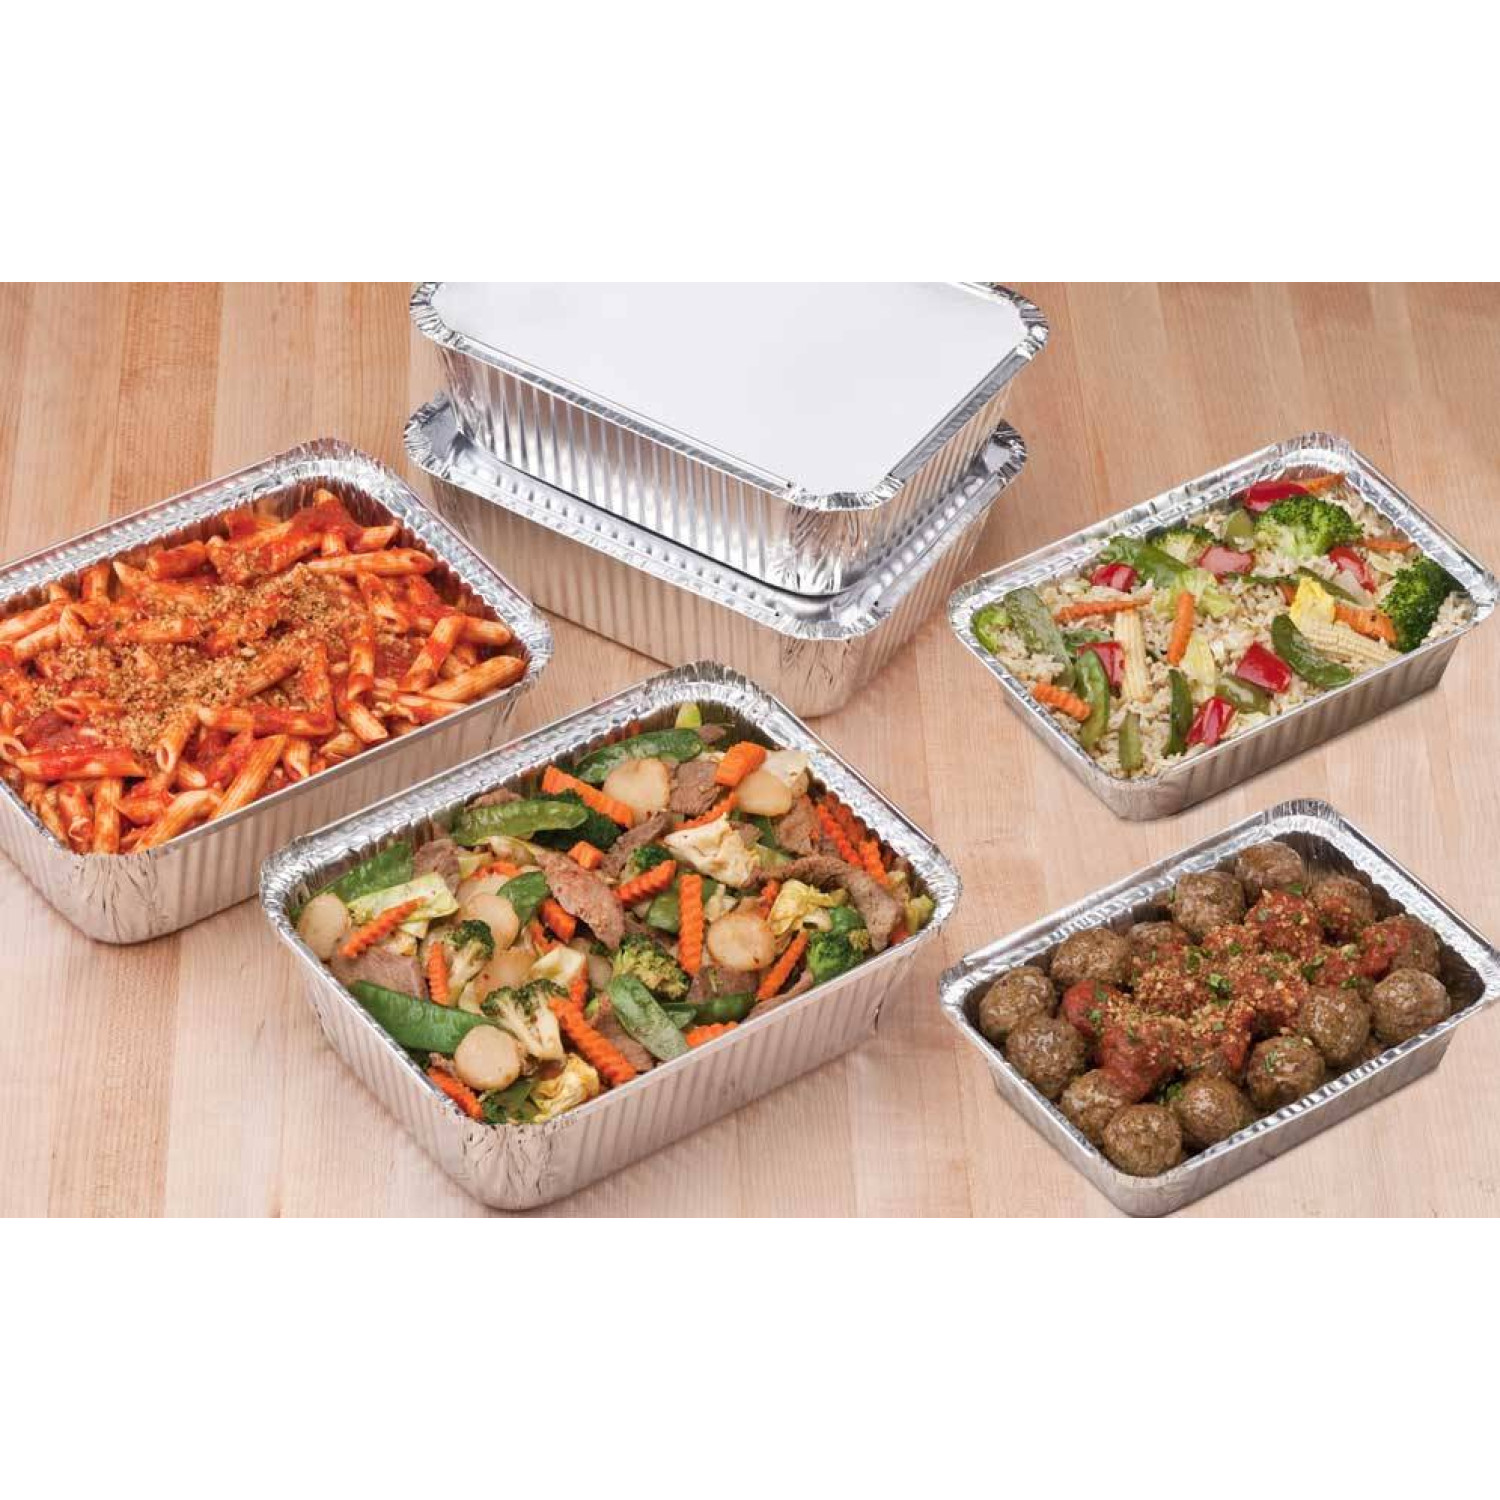 Idl Packaging Flat Foil-Covered Cardboard Lids for 4 lb. Oblong Aluminum Pans 13 inch x 9 inch (Pack of 10)